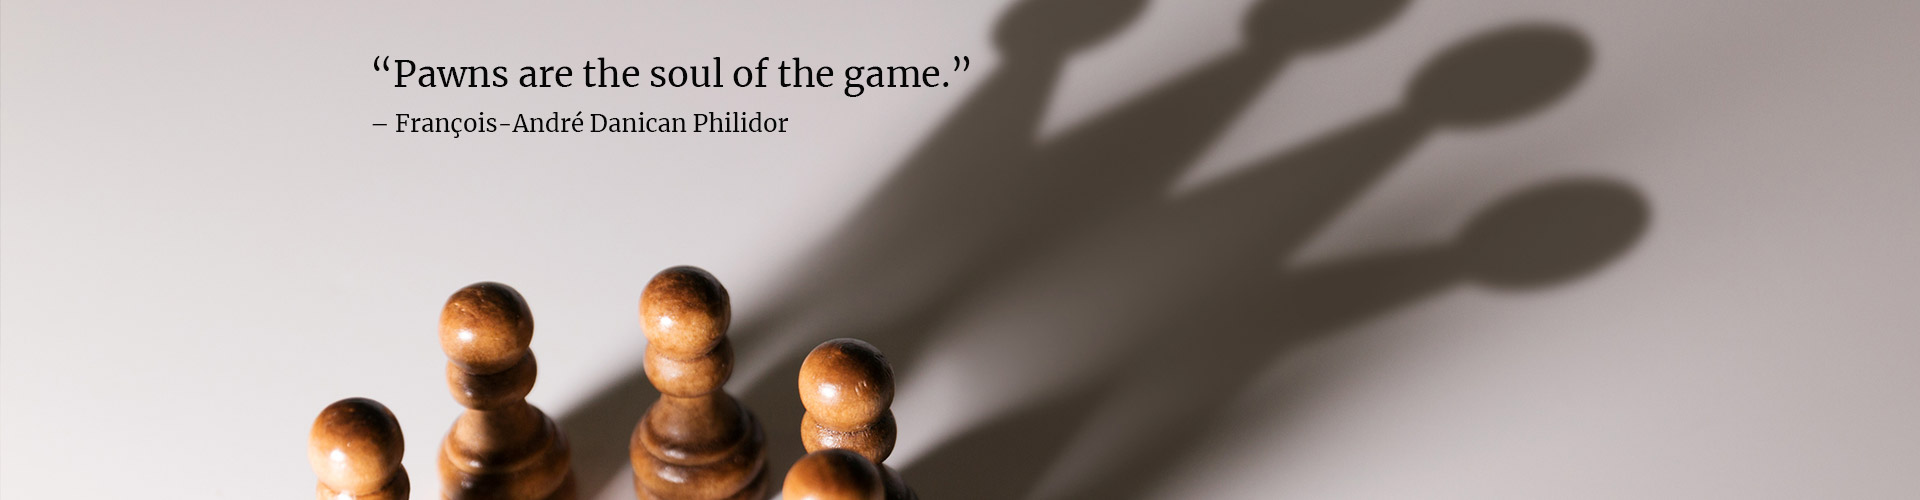 pawns are the soul of the game. Franois-Andr Danican Philidor